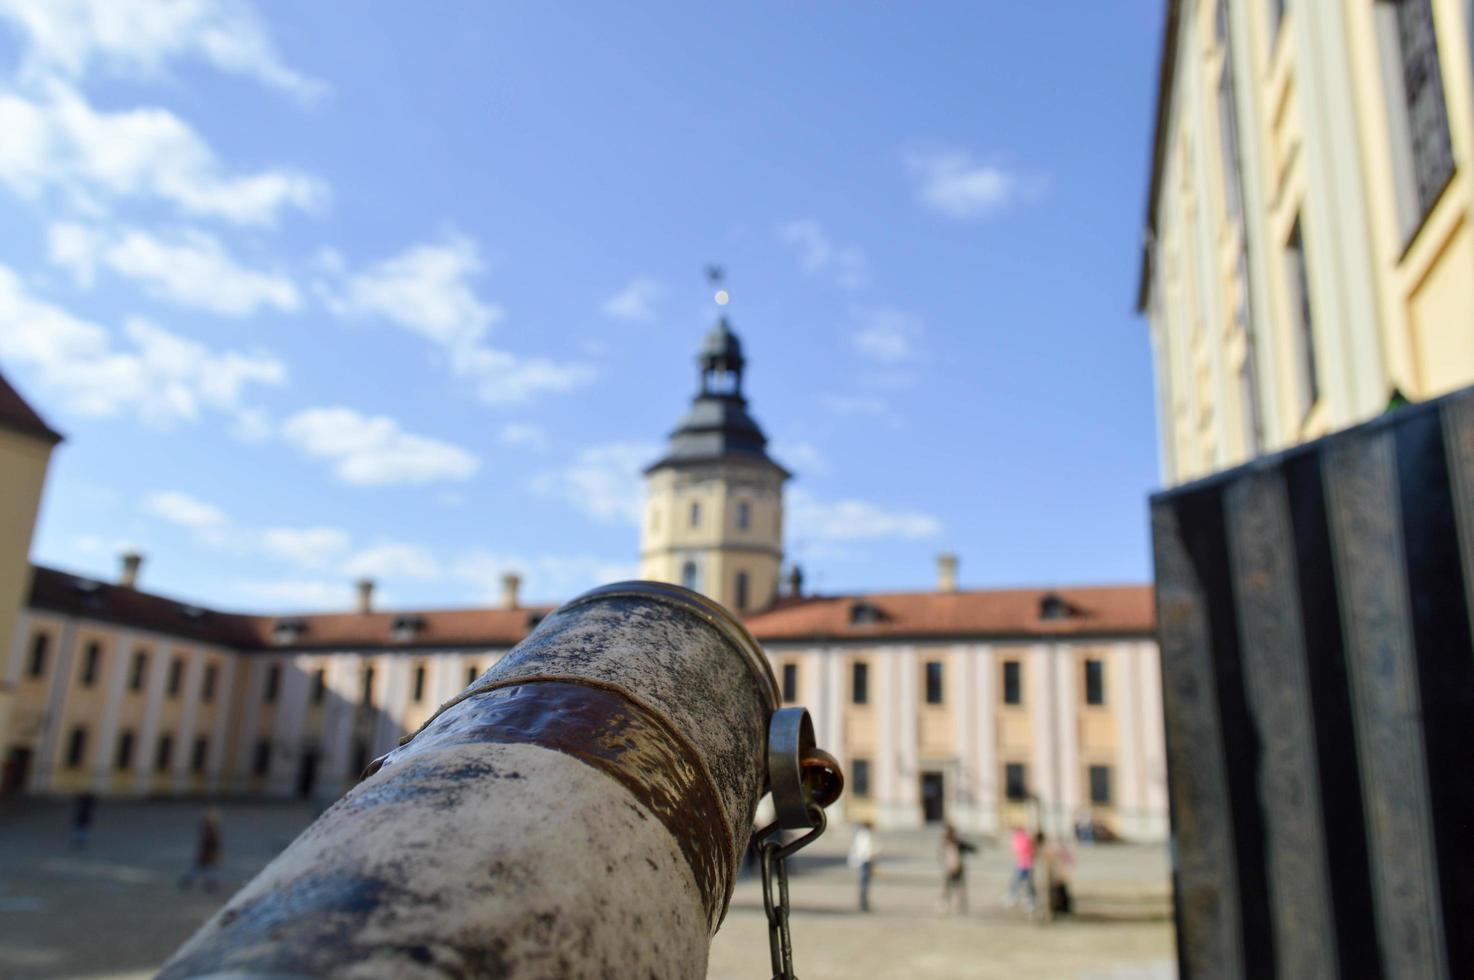 A look from an old ancient spyglass on a European medieval tourist building, a castle, a palace with a spire and a tower photo